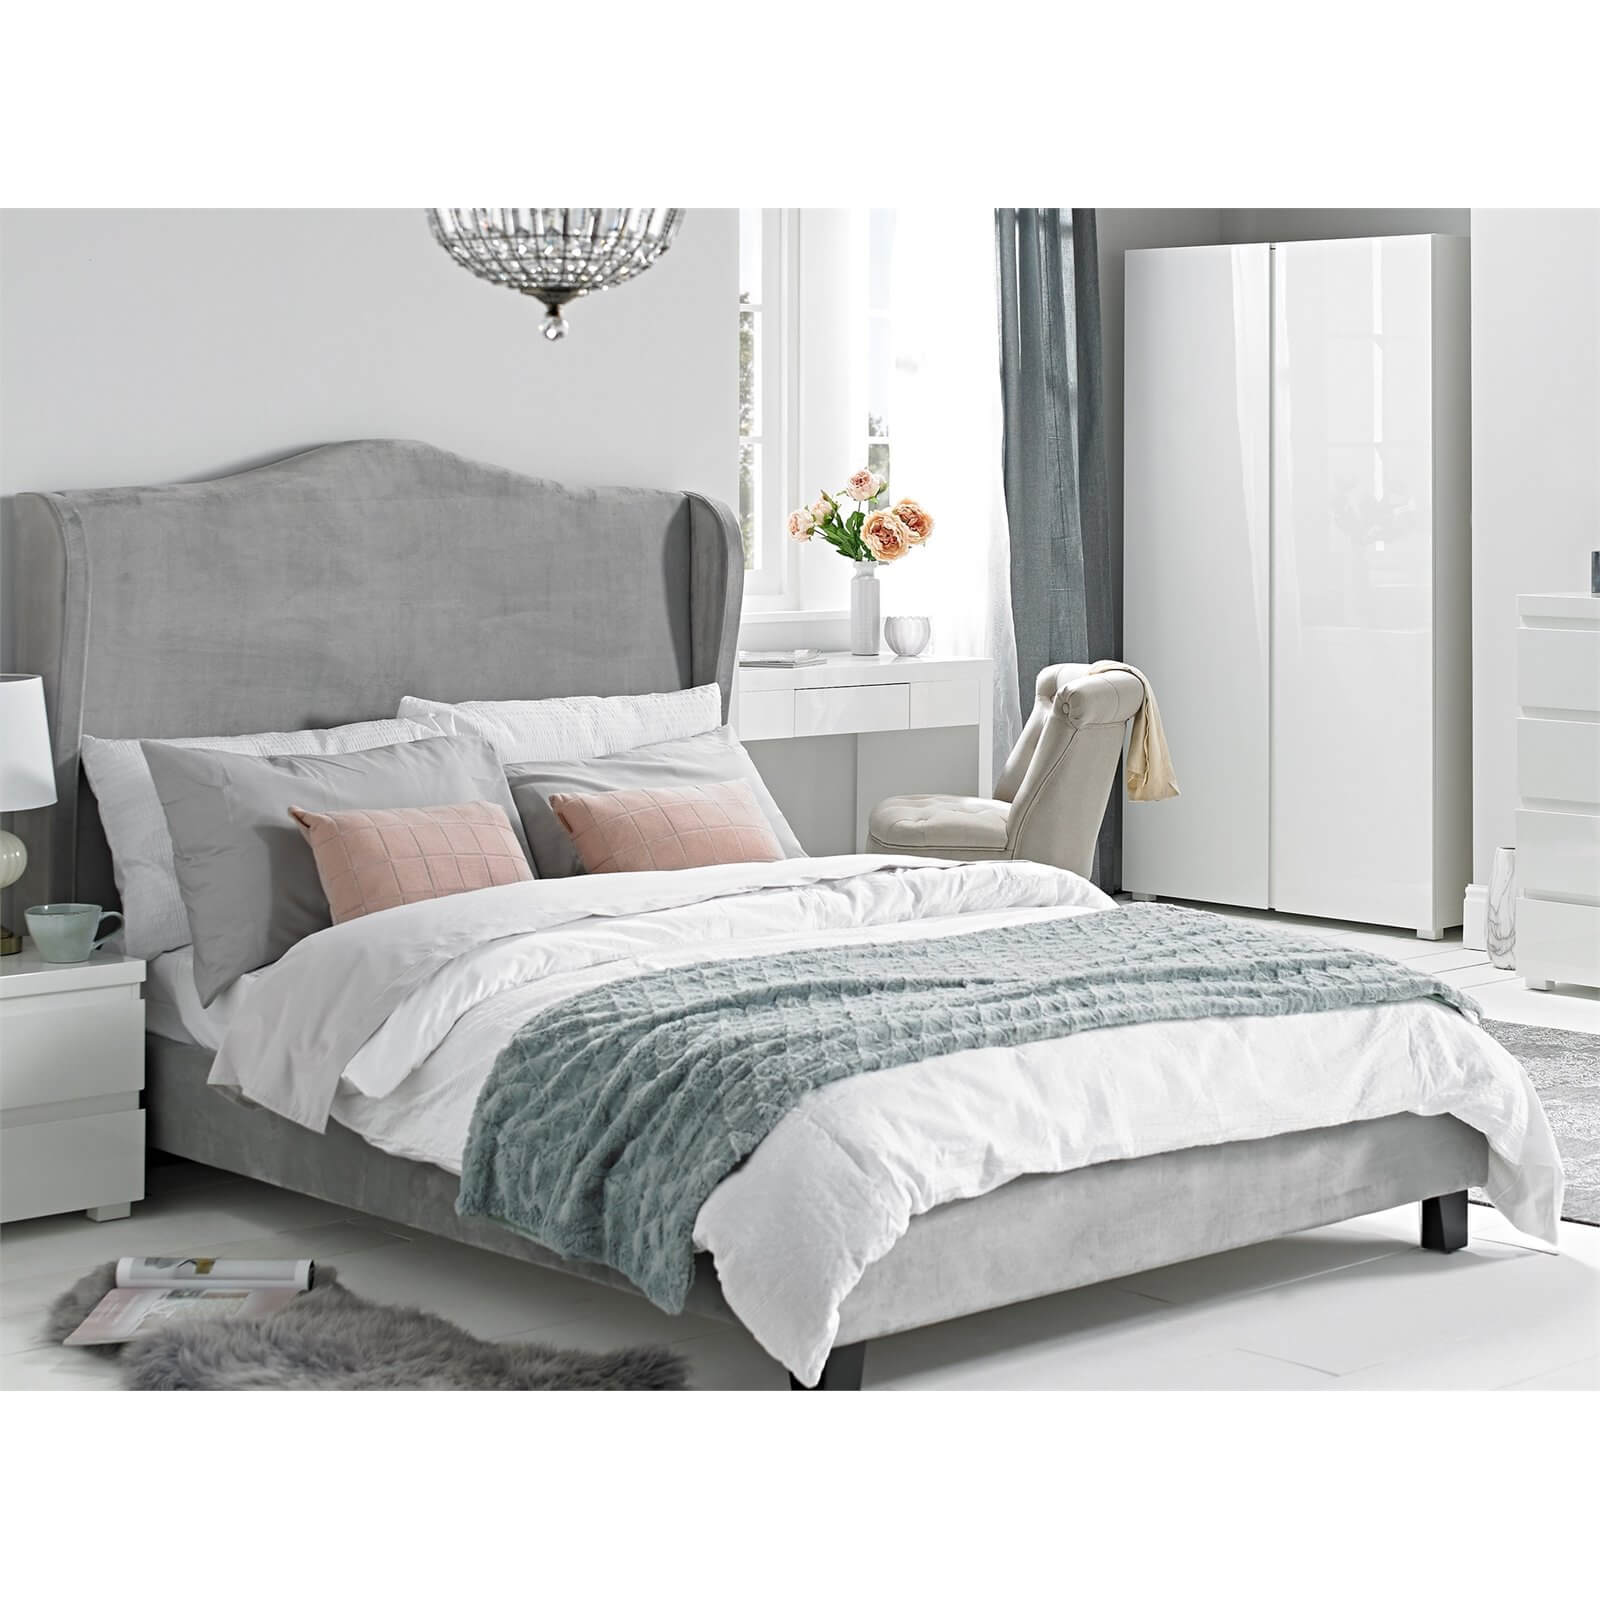 Chateaux Kingsize Bed - Silver